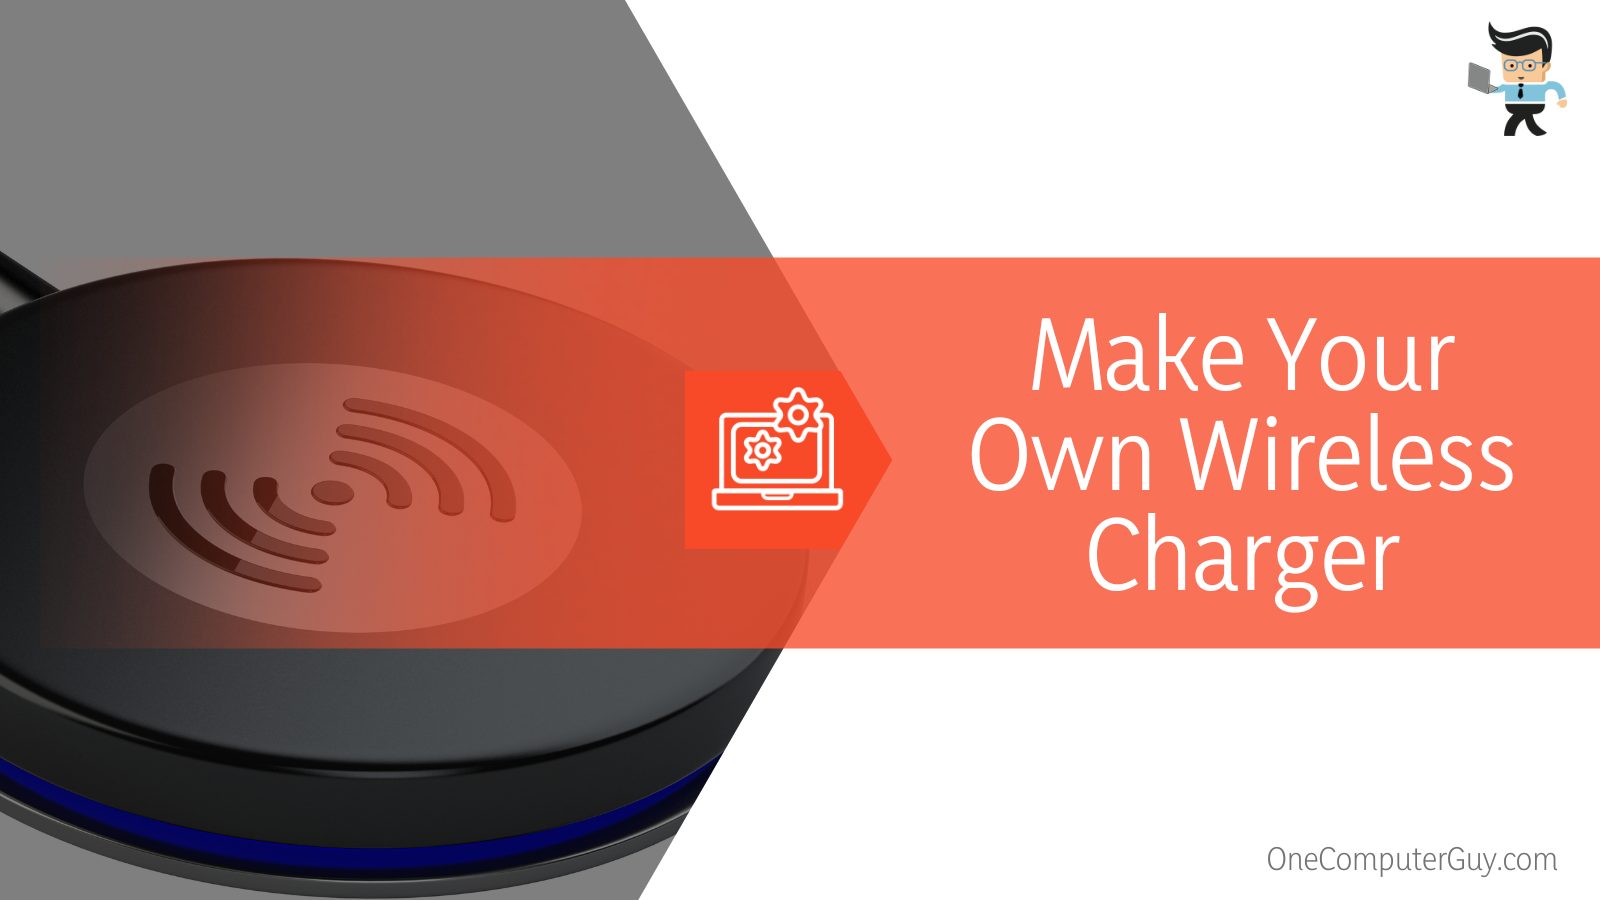 Make Your Own Wireless Charger